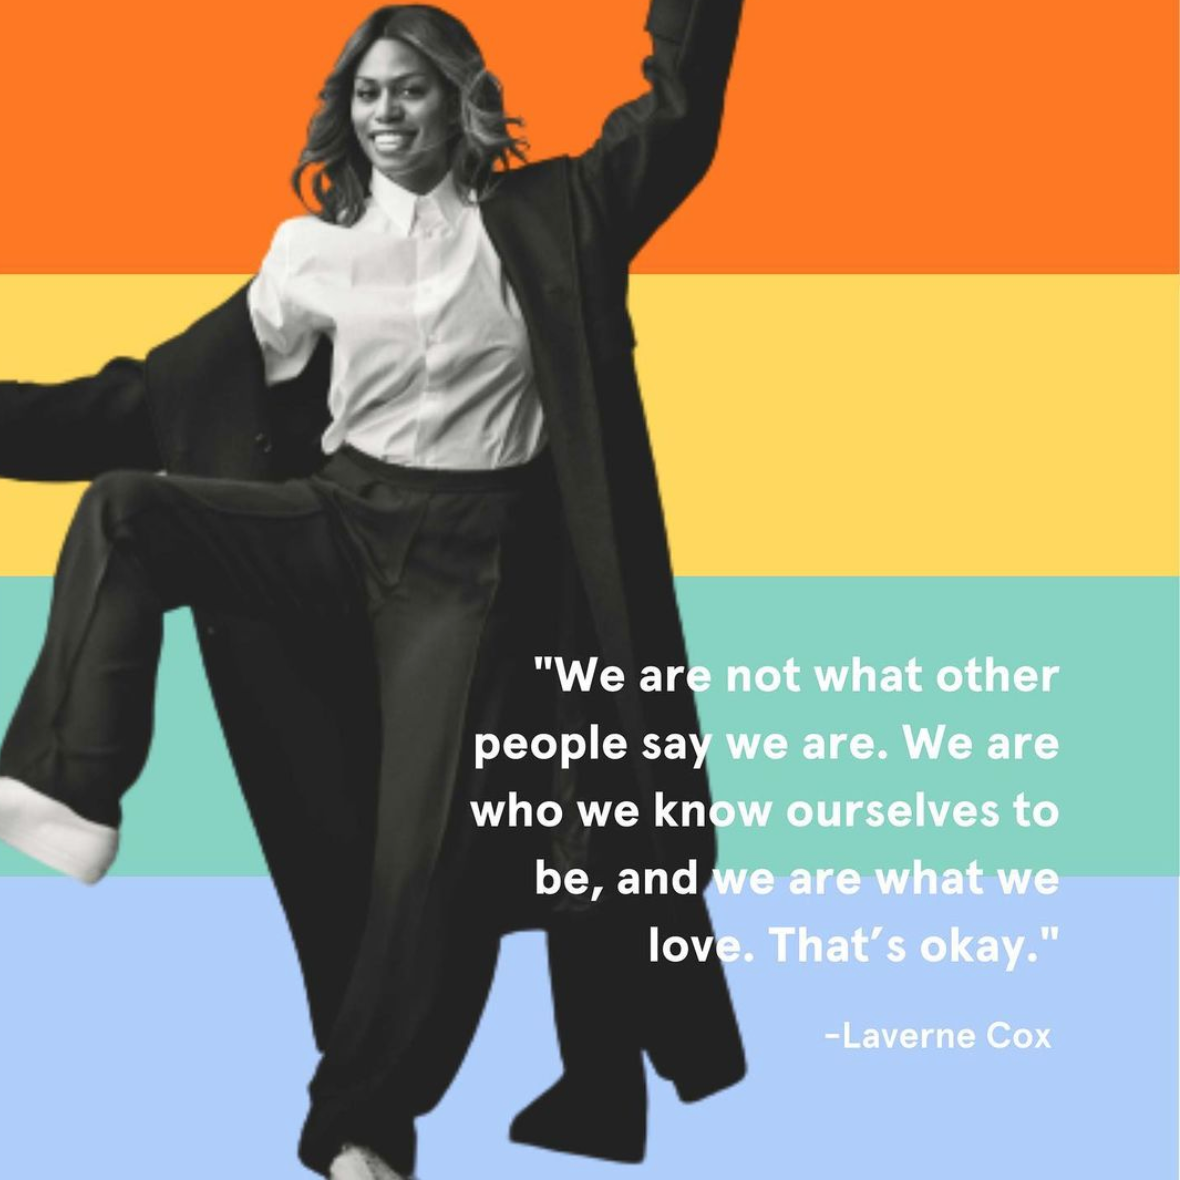 Portrait of Laverne Cox dancing with a quote from her overlaid, "We are not what other people say we are. We are who we know ourselves to be, and we are what we love. That's okay."